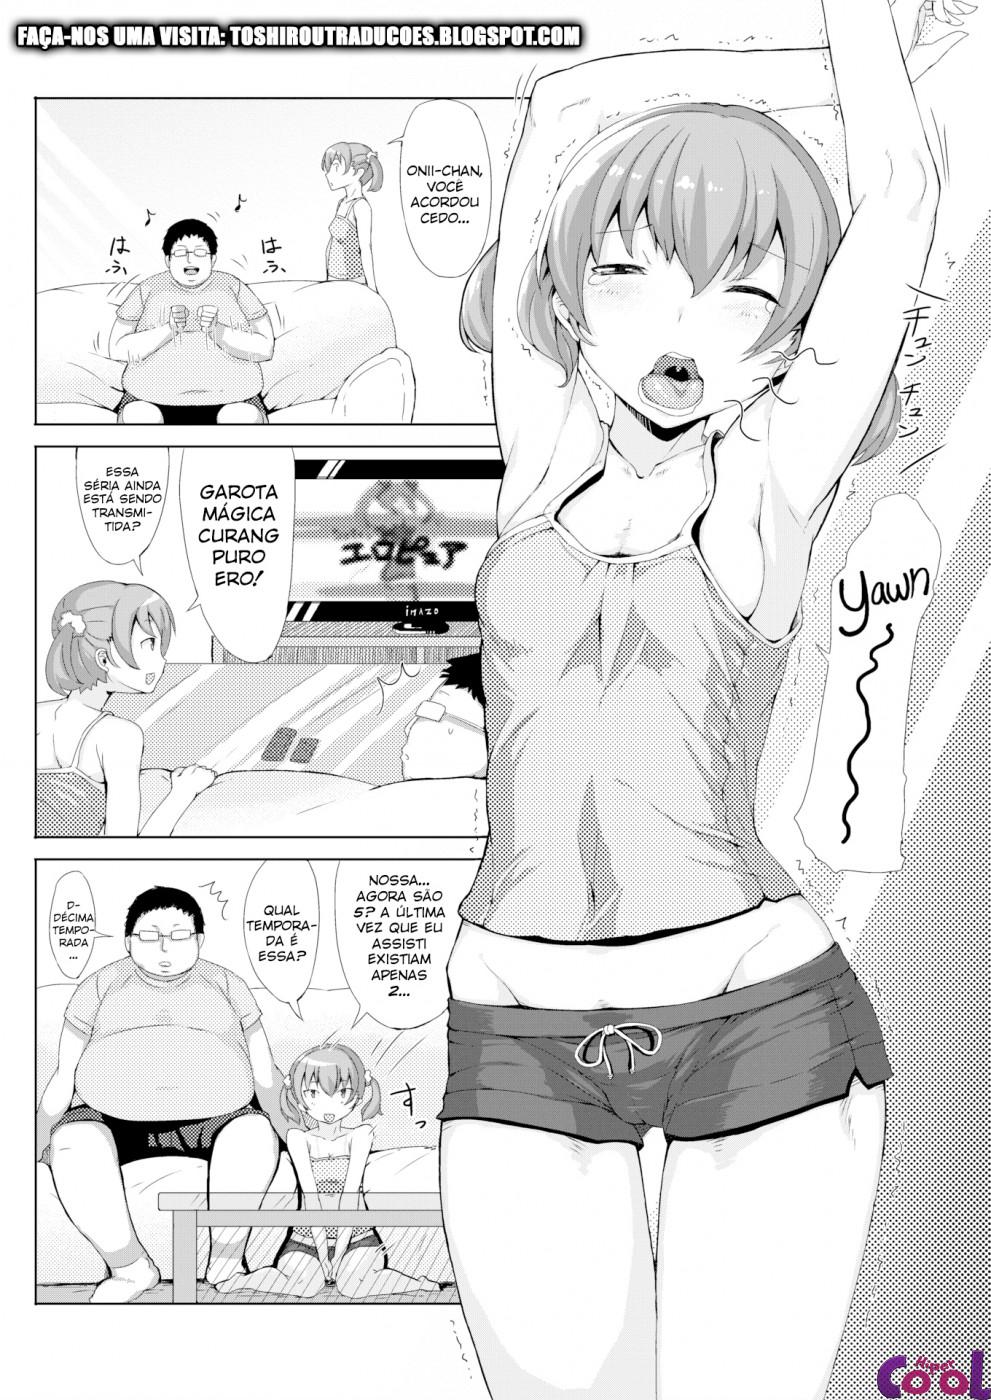 lenient-little-sister-chapter-01-page-8.jpg